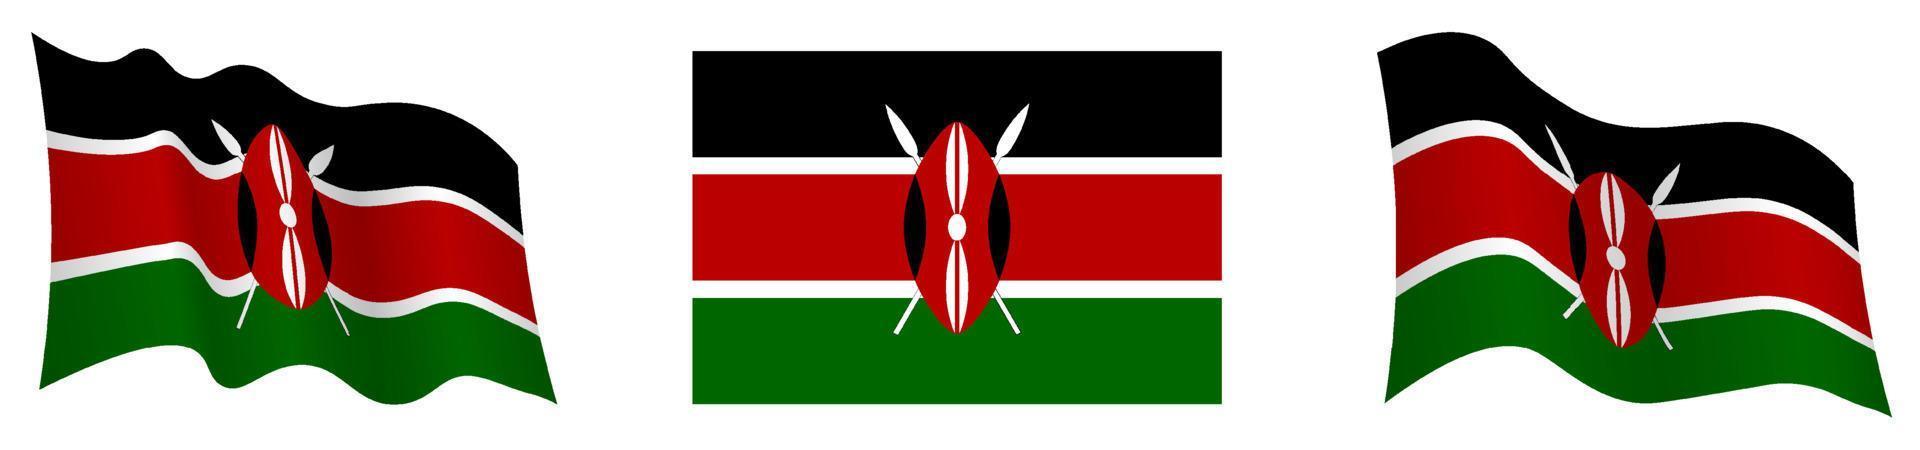 Kenya flag in static position and in motion, fluttering in wind in exact colors and sizes, on white background vector